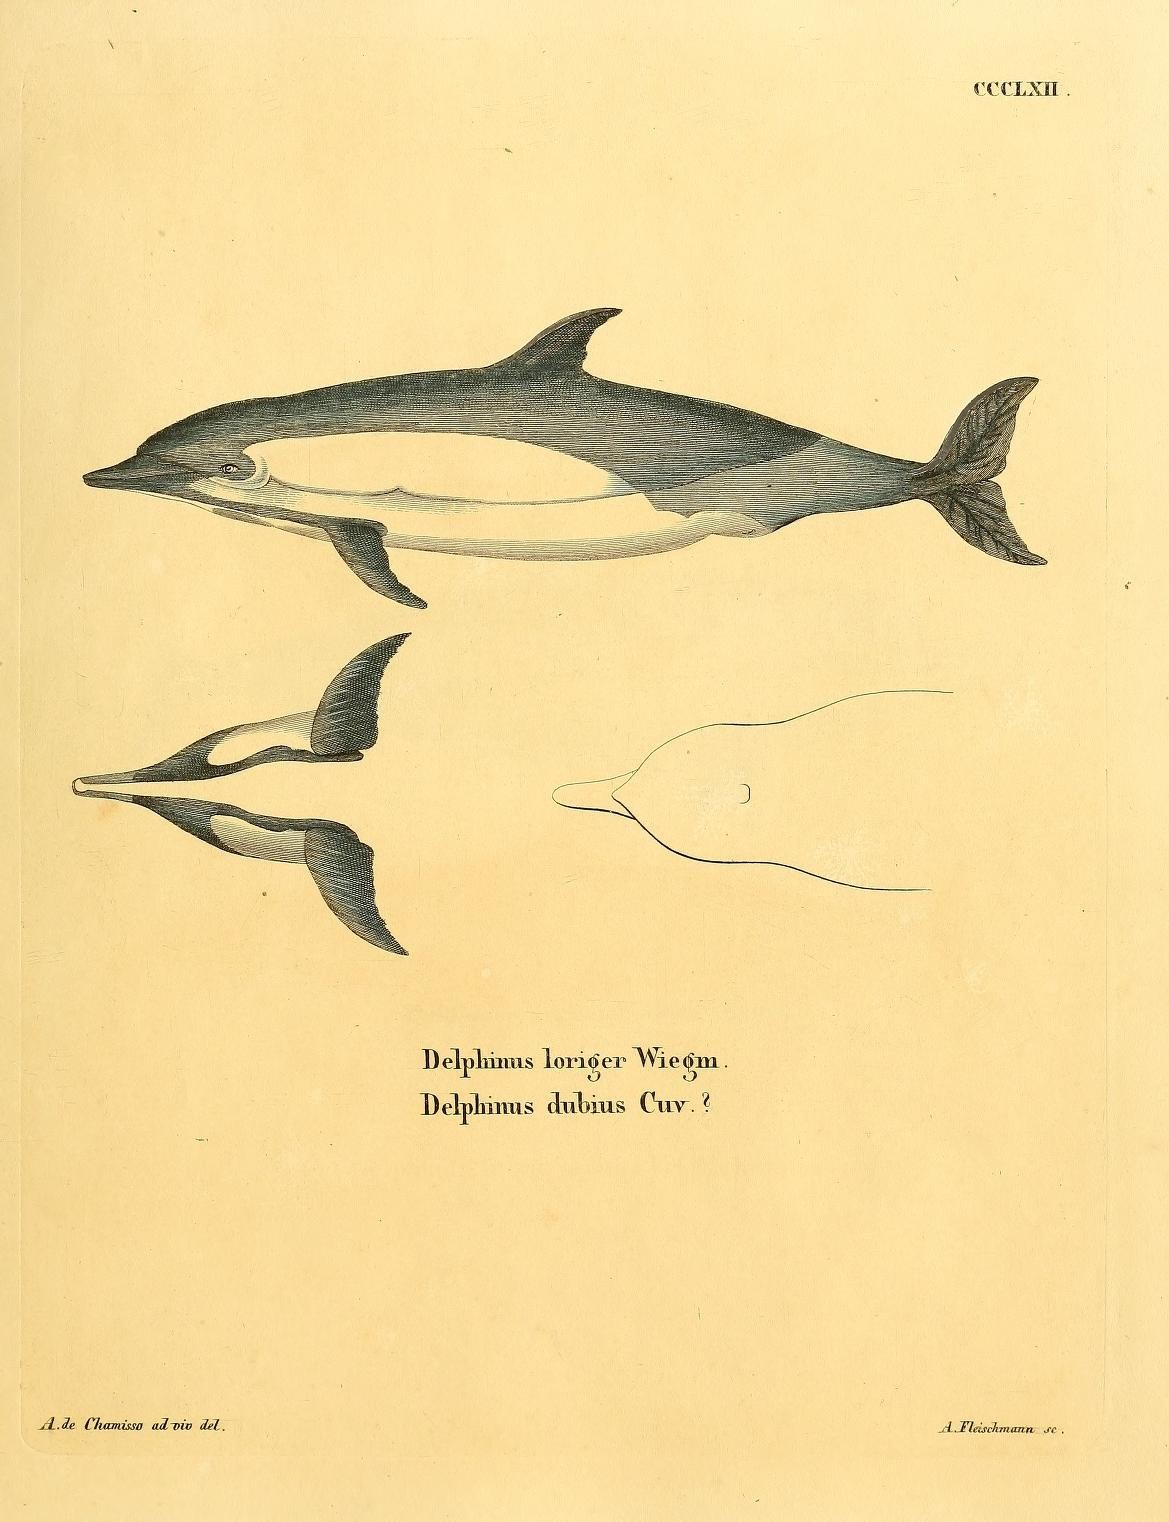 the dolphins and fish in this book are black and white